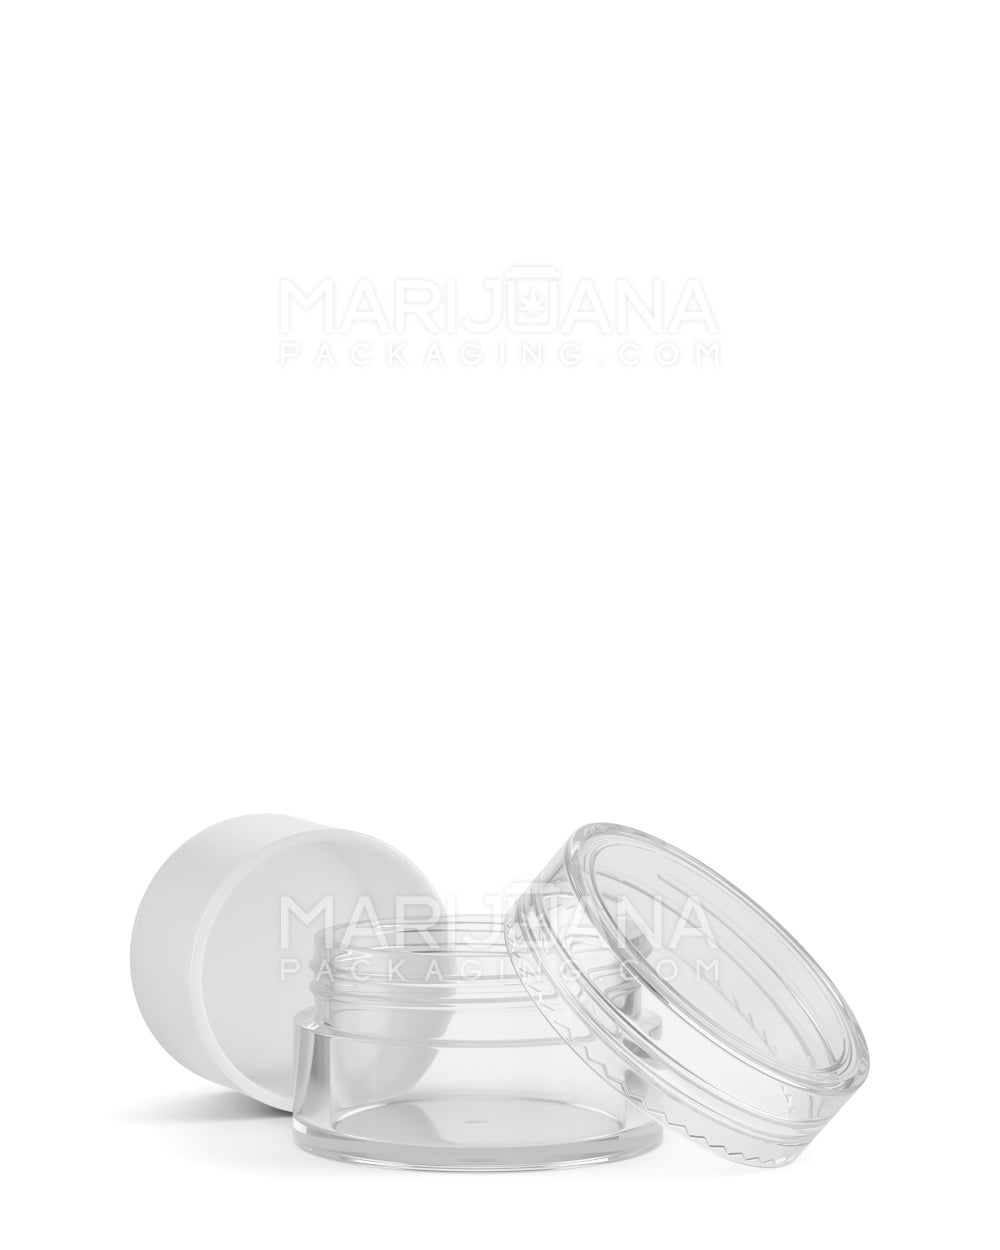 Clear Concentrate Containers w/ Screw Top Cap & White Silicone Insert | 7mL - Plastic - 100 Count - 4